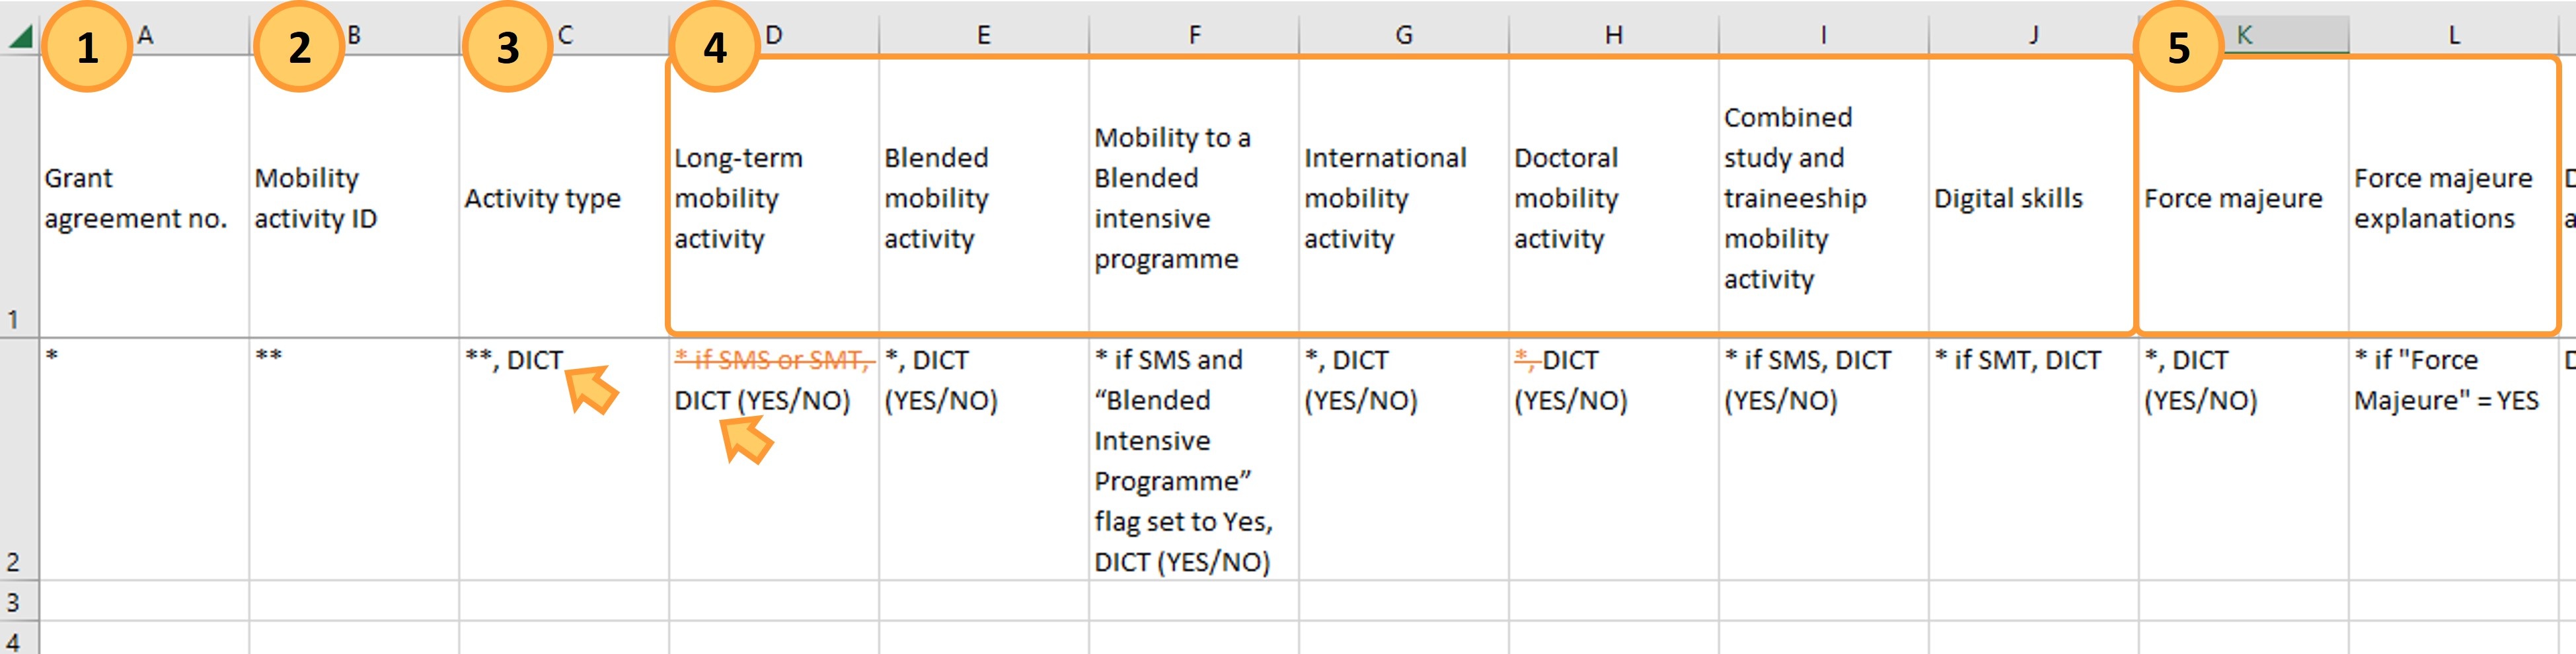 Grant Agreement No, Mobility Activity ID, Activity Type and other required fields